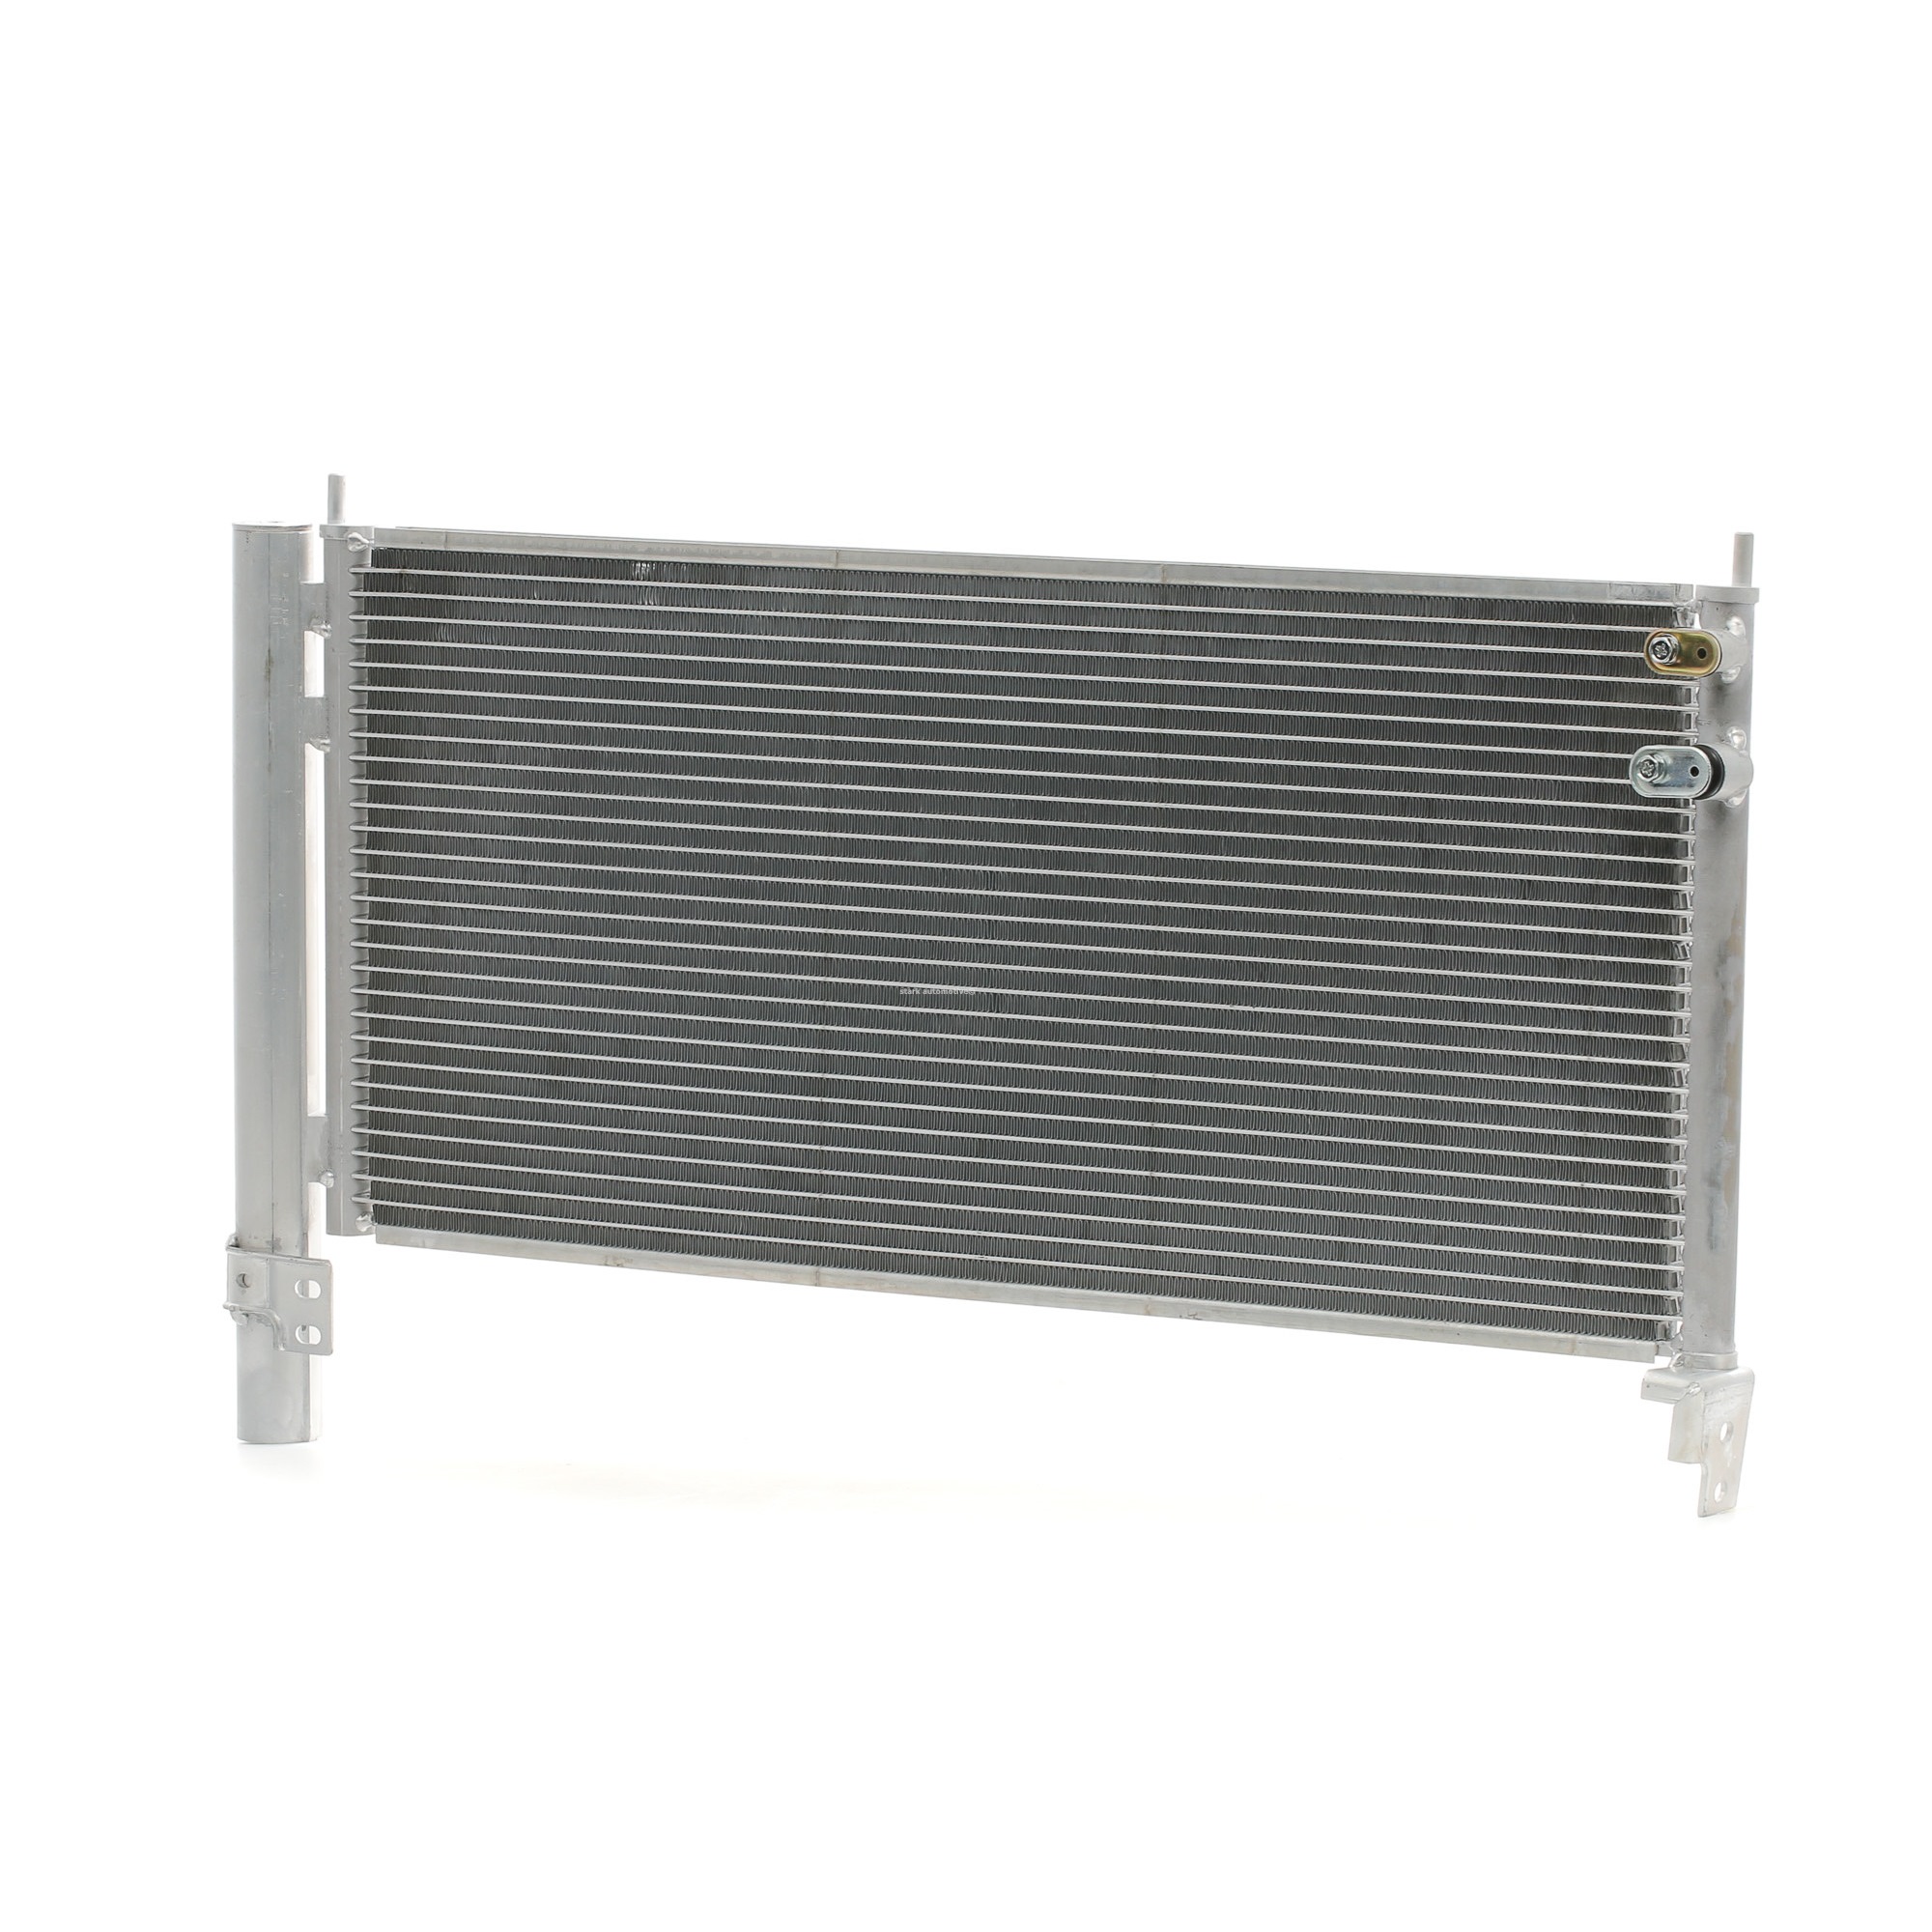 STARK SKCD-0110443 Air conditioning condenser with dryer, 675 x 293 x 23 mm